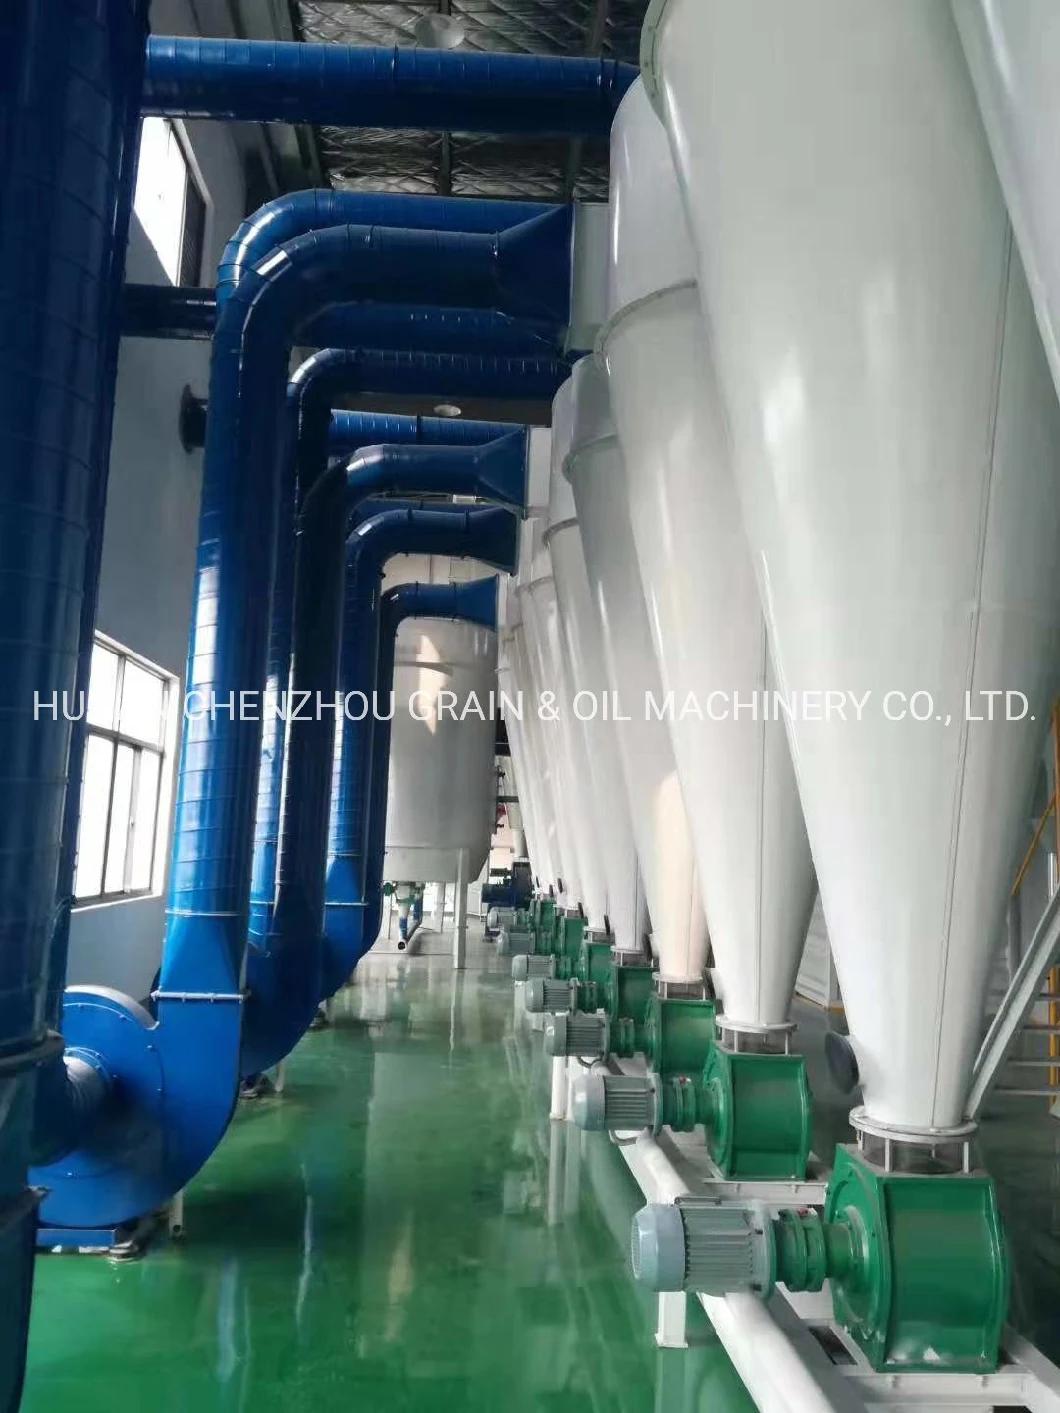 1000tpd Parboiling Automatic Rice Milling Bangladesh